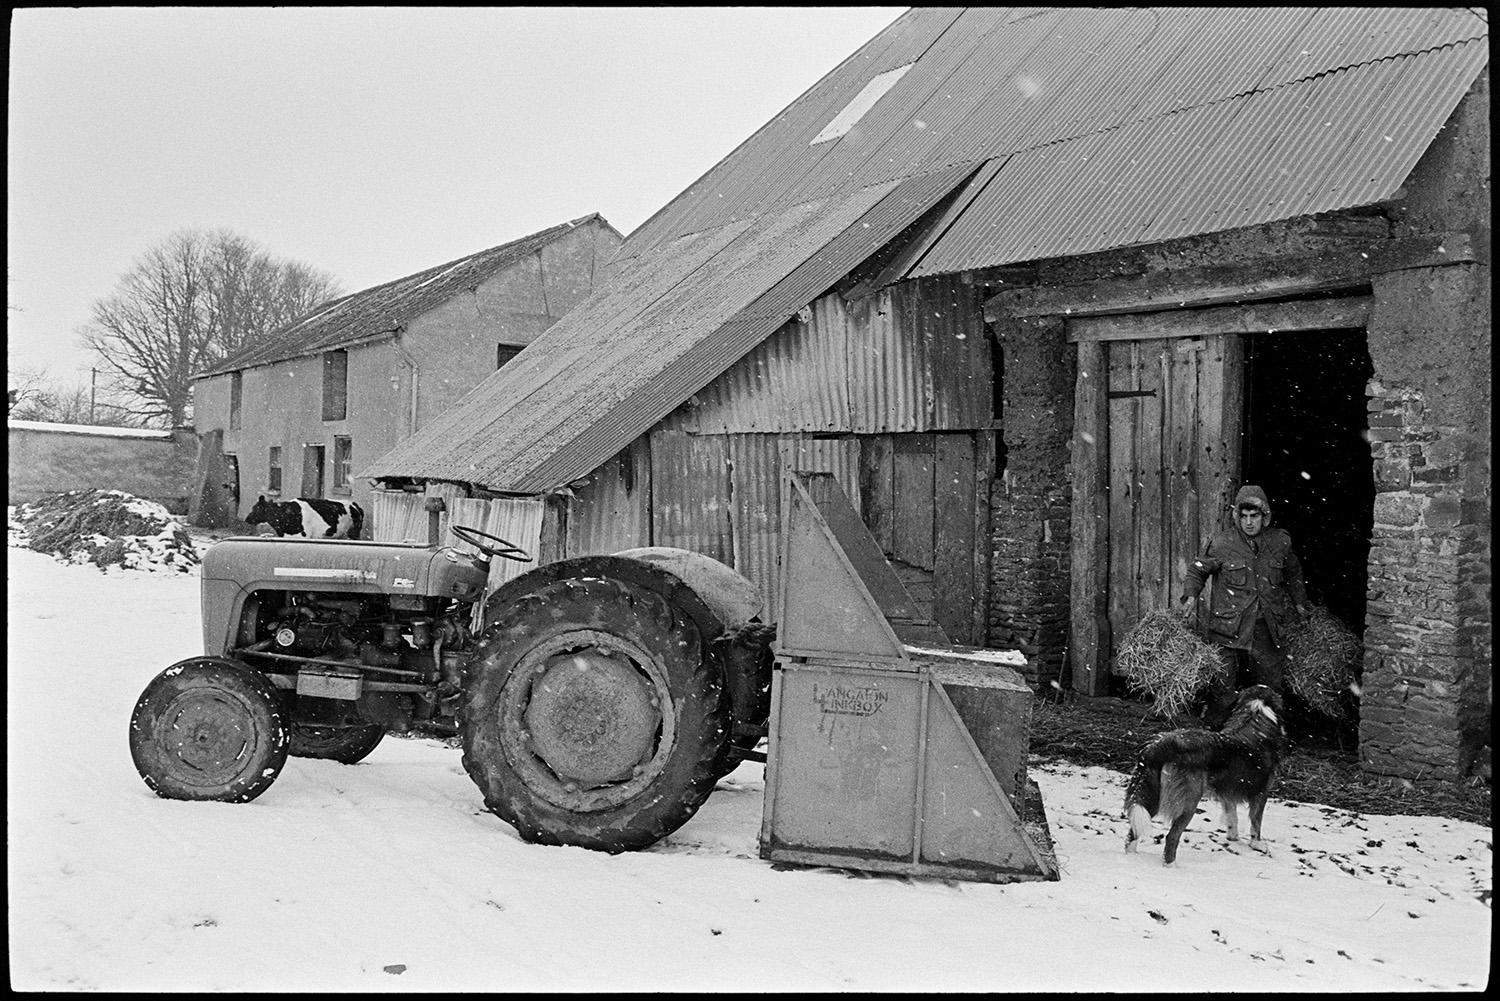 Farmer taking hay and water tank out to snowbound sheep. 
[Graham Ward loading hay bales from a barn into a link box attached to a tractor in the farmyard at Parsonage, Iddesleigh, to take to sheep. A dog is with him, Snow is falling an the farmyard is covered in snow. A cow and muck heap can be seen in the background.]